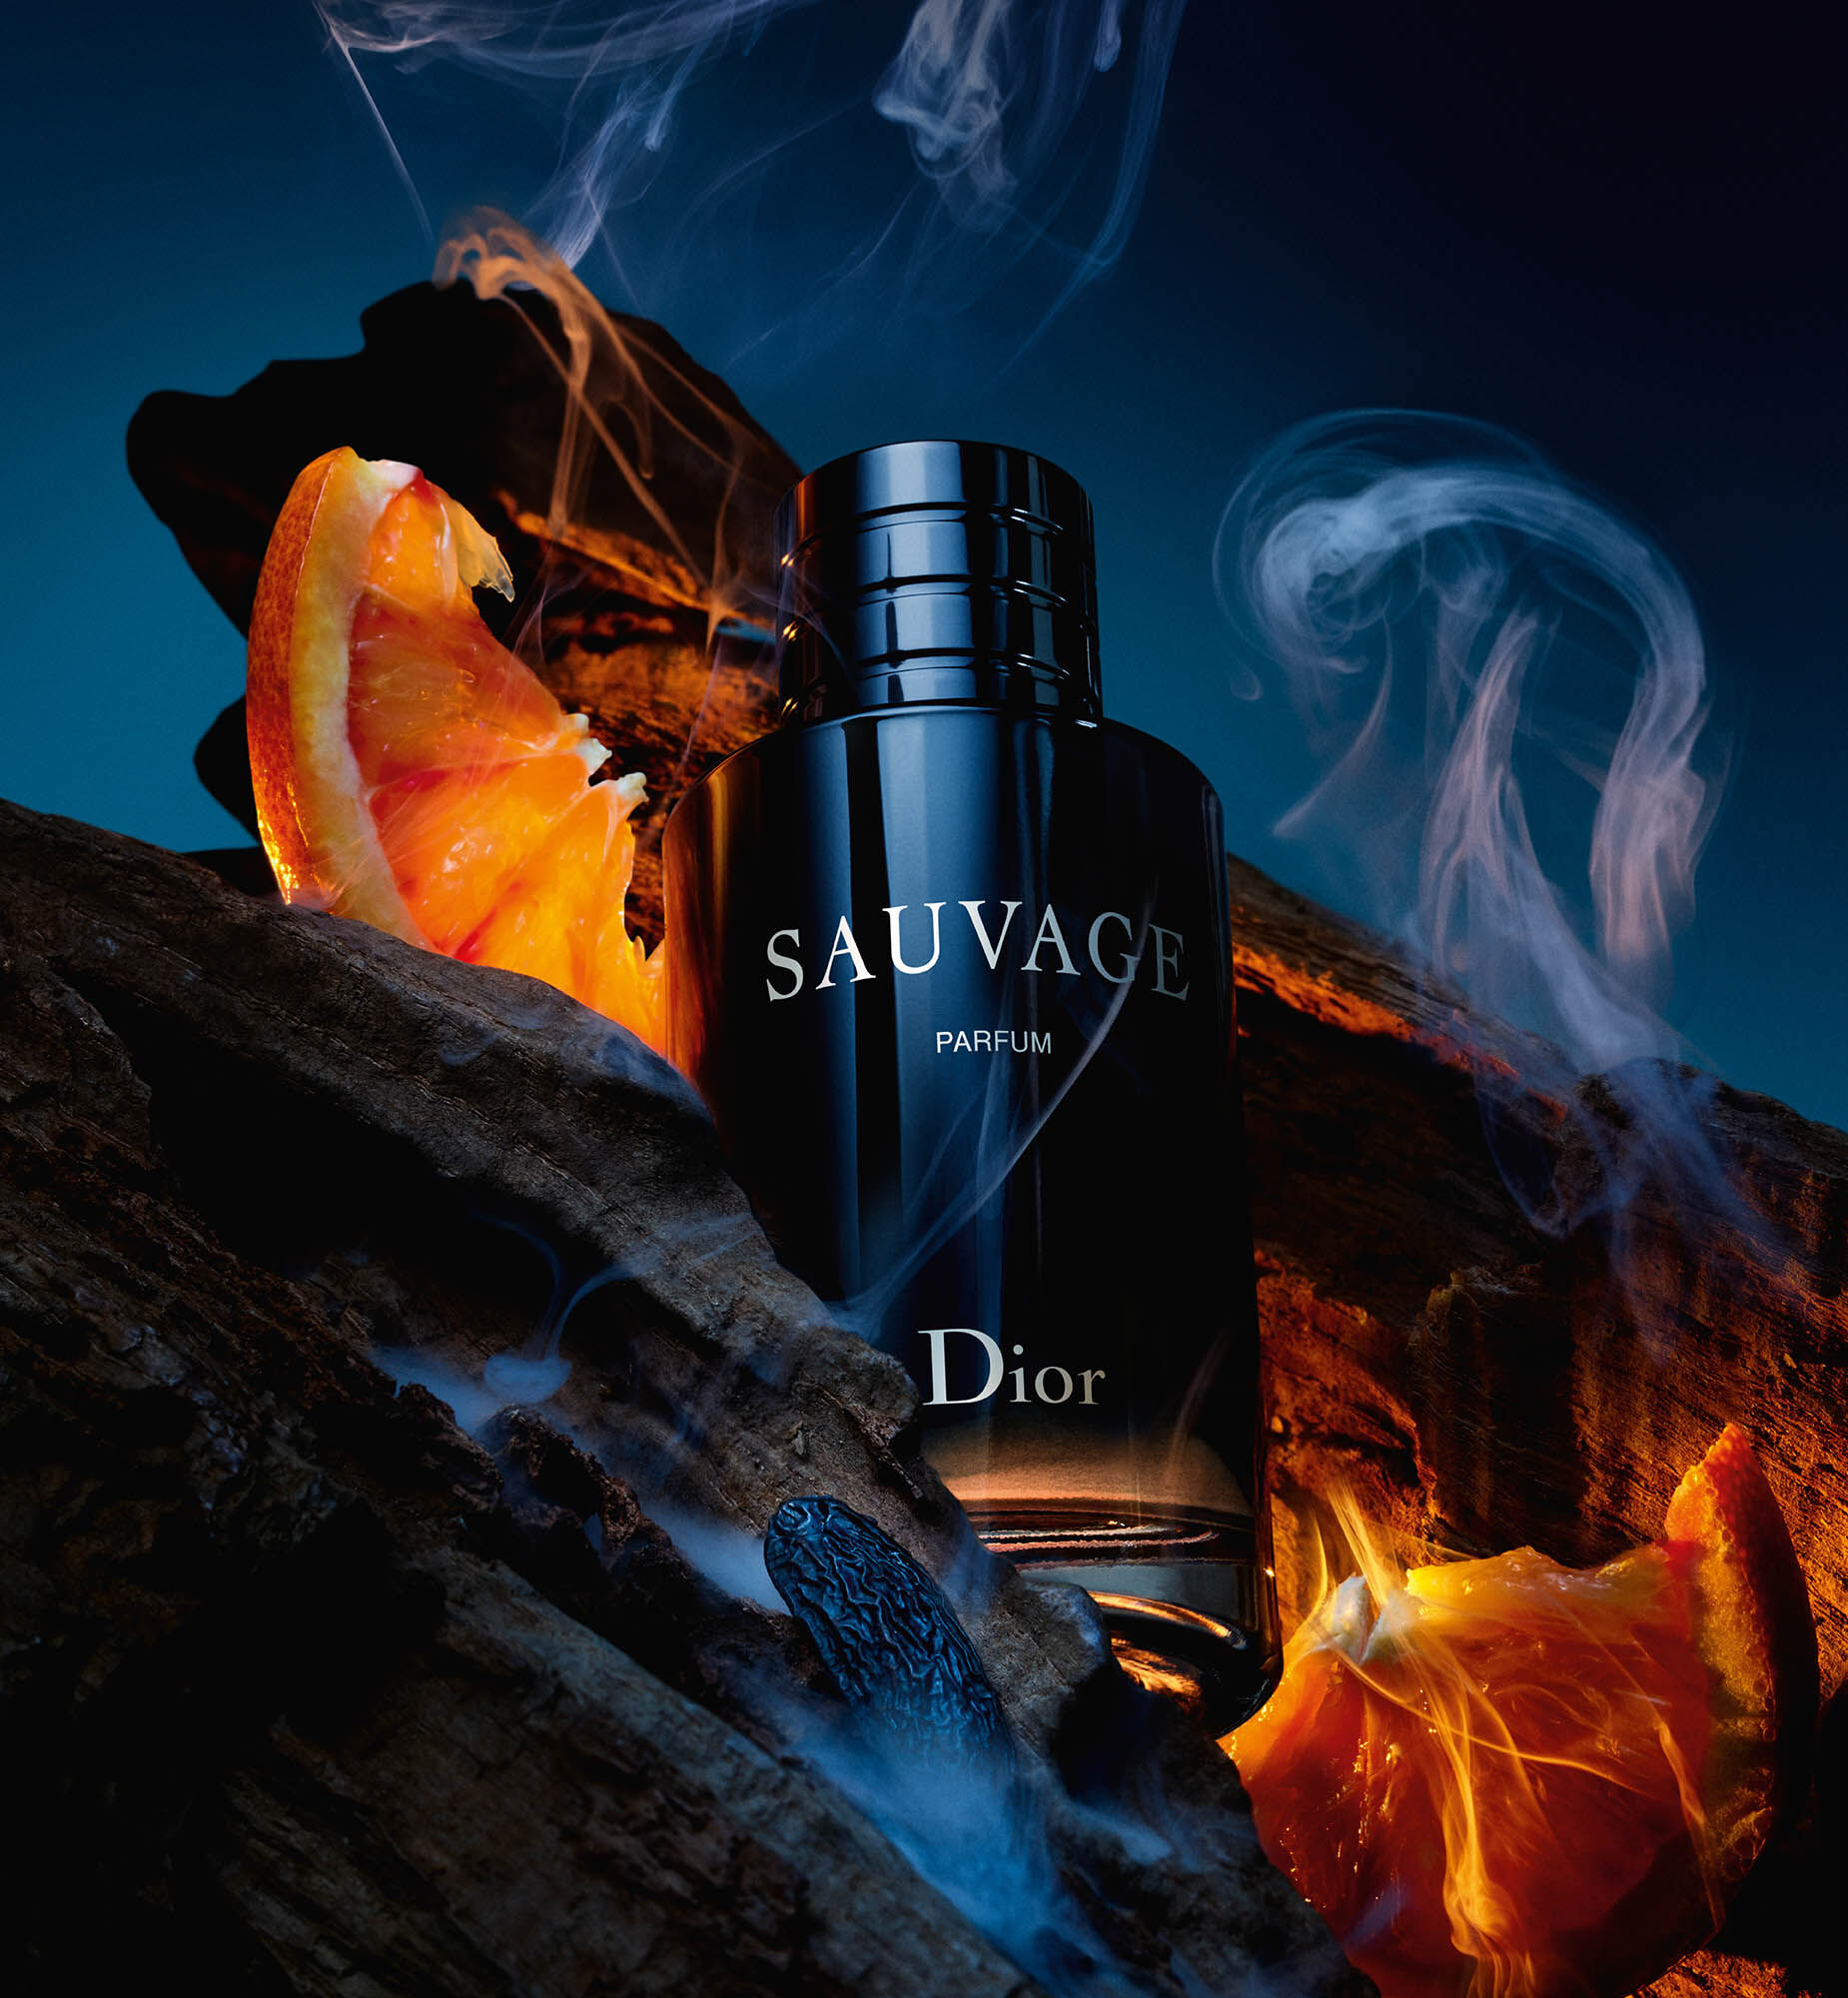 Sauvage Parfum: Refillable Citrus and Woody Fragrance | DIOR